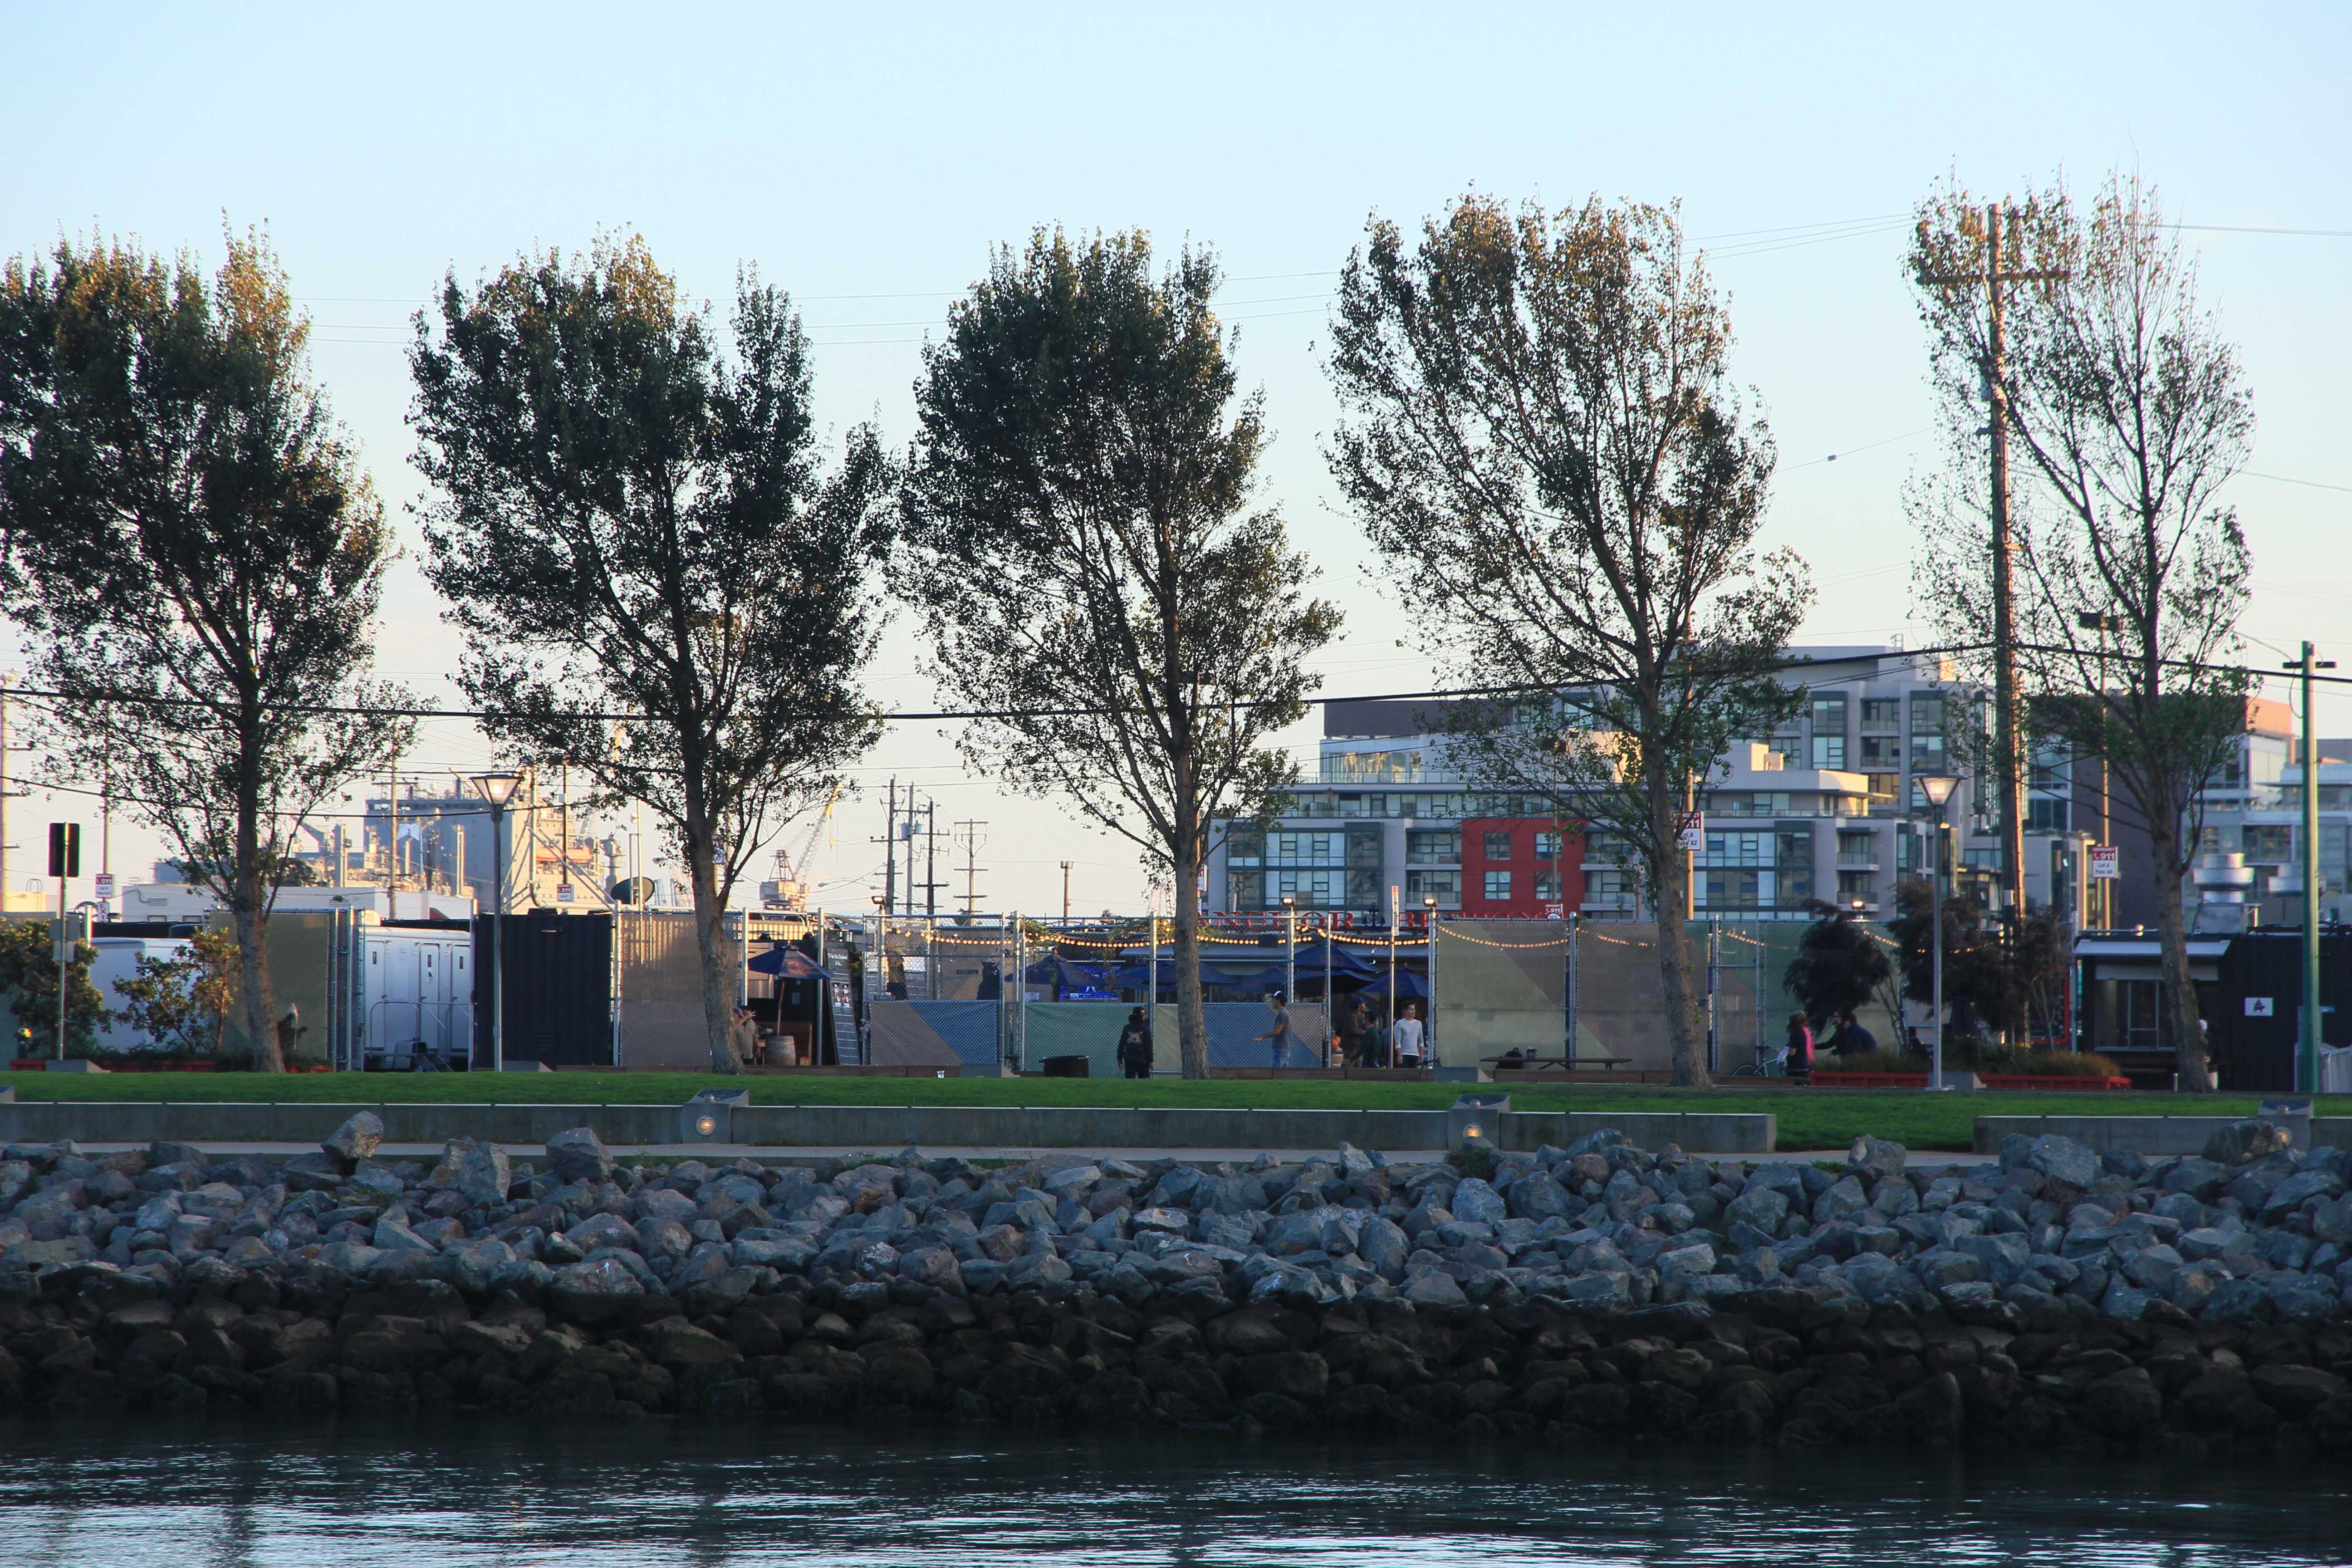 A+yard+of+shipping+containers+turned+into+restaurants+lies+hidden+next+to+McCovey++Cove.+